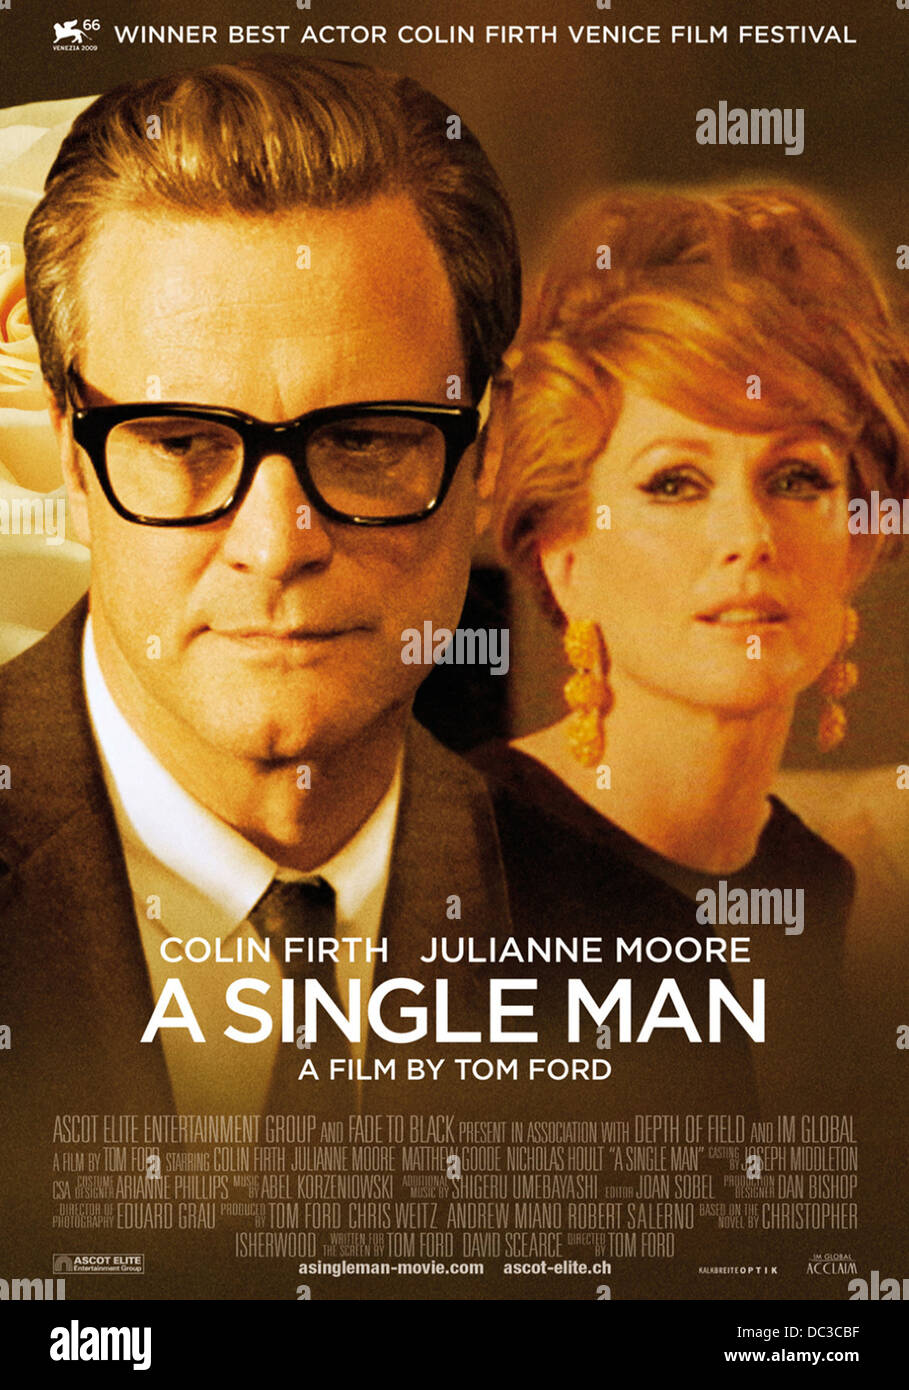 A SINGLE MAN (POSTER) (2009) COLIN FIRTH JULIANNE MOORE TOM FORD (DIR) 011  MOVIESTORE COLLECTION LTD Stock Photo - Alamy